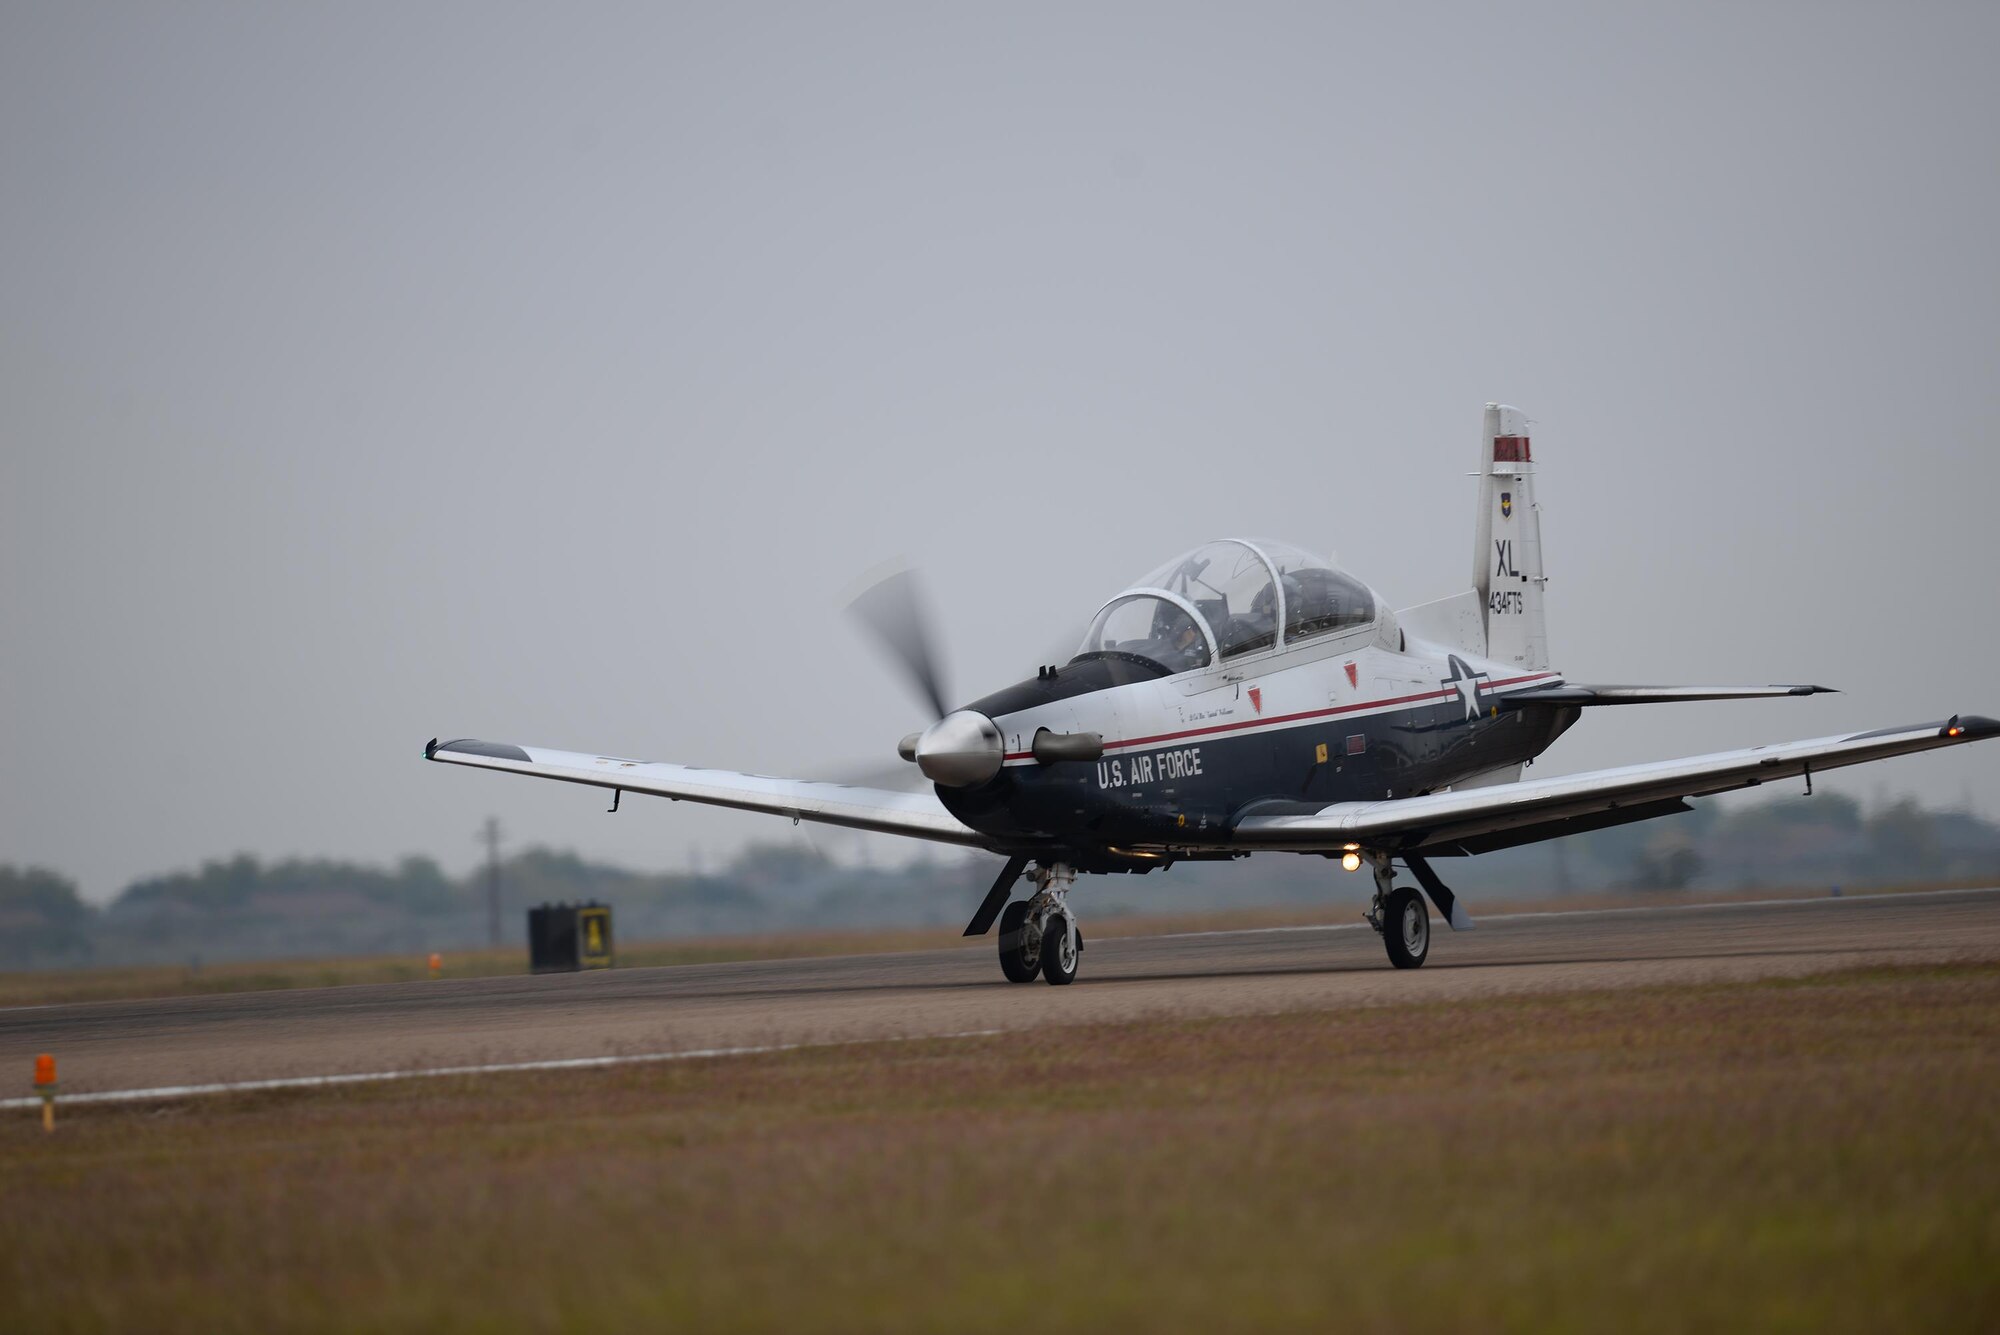 Capt. Steven Parsons, 47th Student Squadron assistant director of operations and Jerry Yellin, author and retired U.S. Army Air Corps Captain, take off in a T-6A Texan II on Laughlin Air Force Base, Texas, Dec. 15, 2016. Yellin visited Laughlin as the guest speaker for Specialized Undergraduate Pilot Training class 17-03’s graduation and was given an orientation flight while here. (U.S. Air Force photo/Senior Airman Ariel D. Partlow)